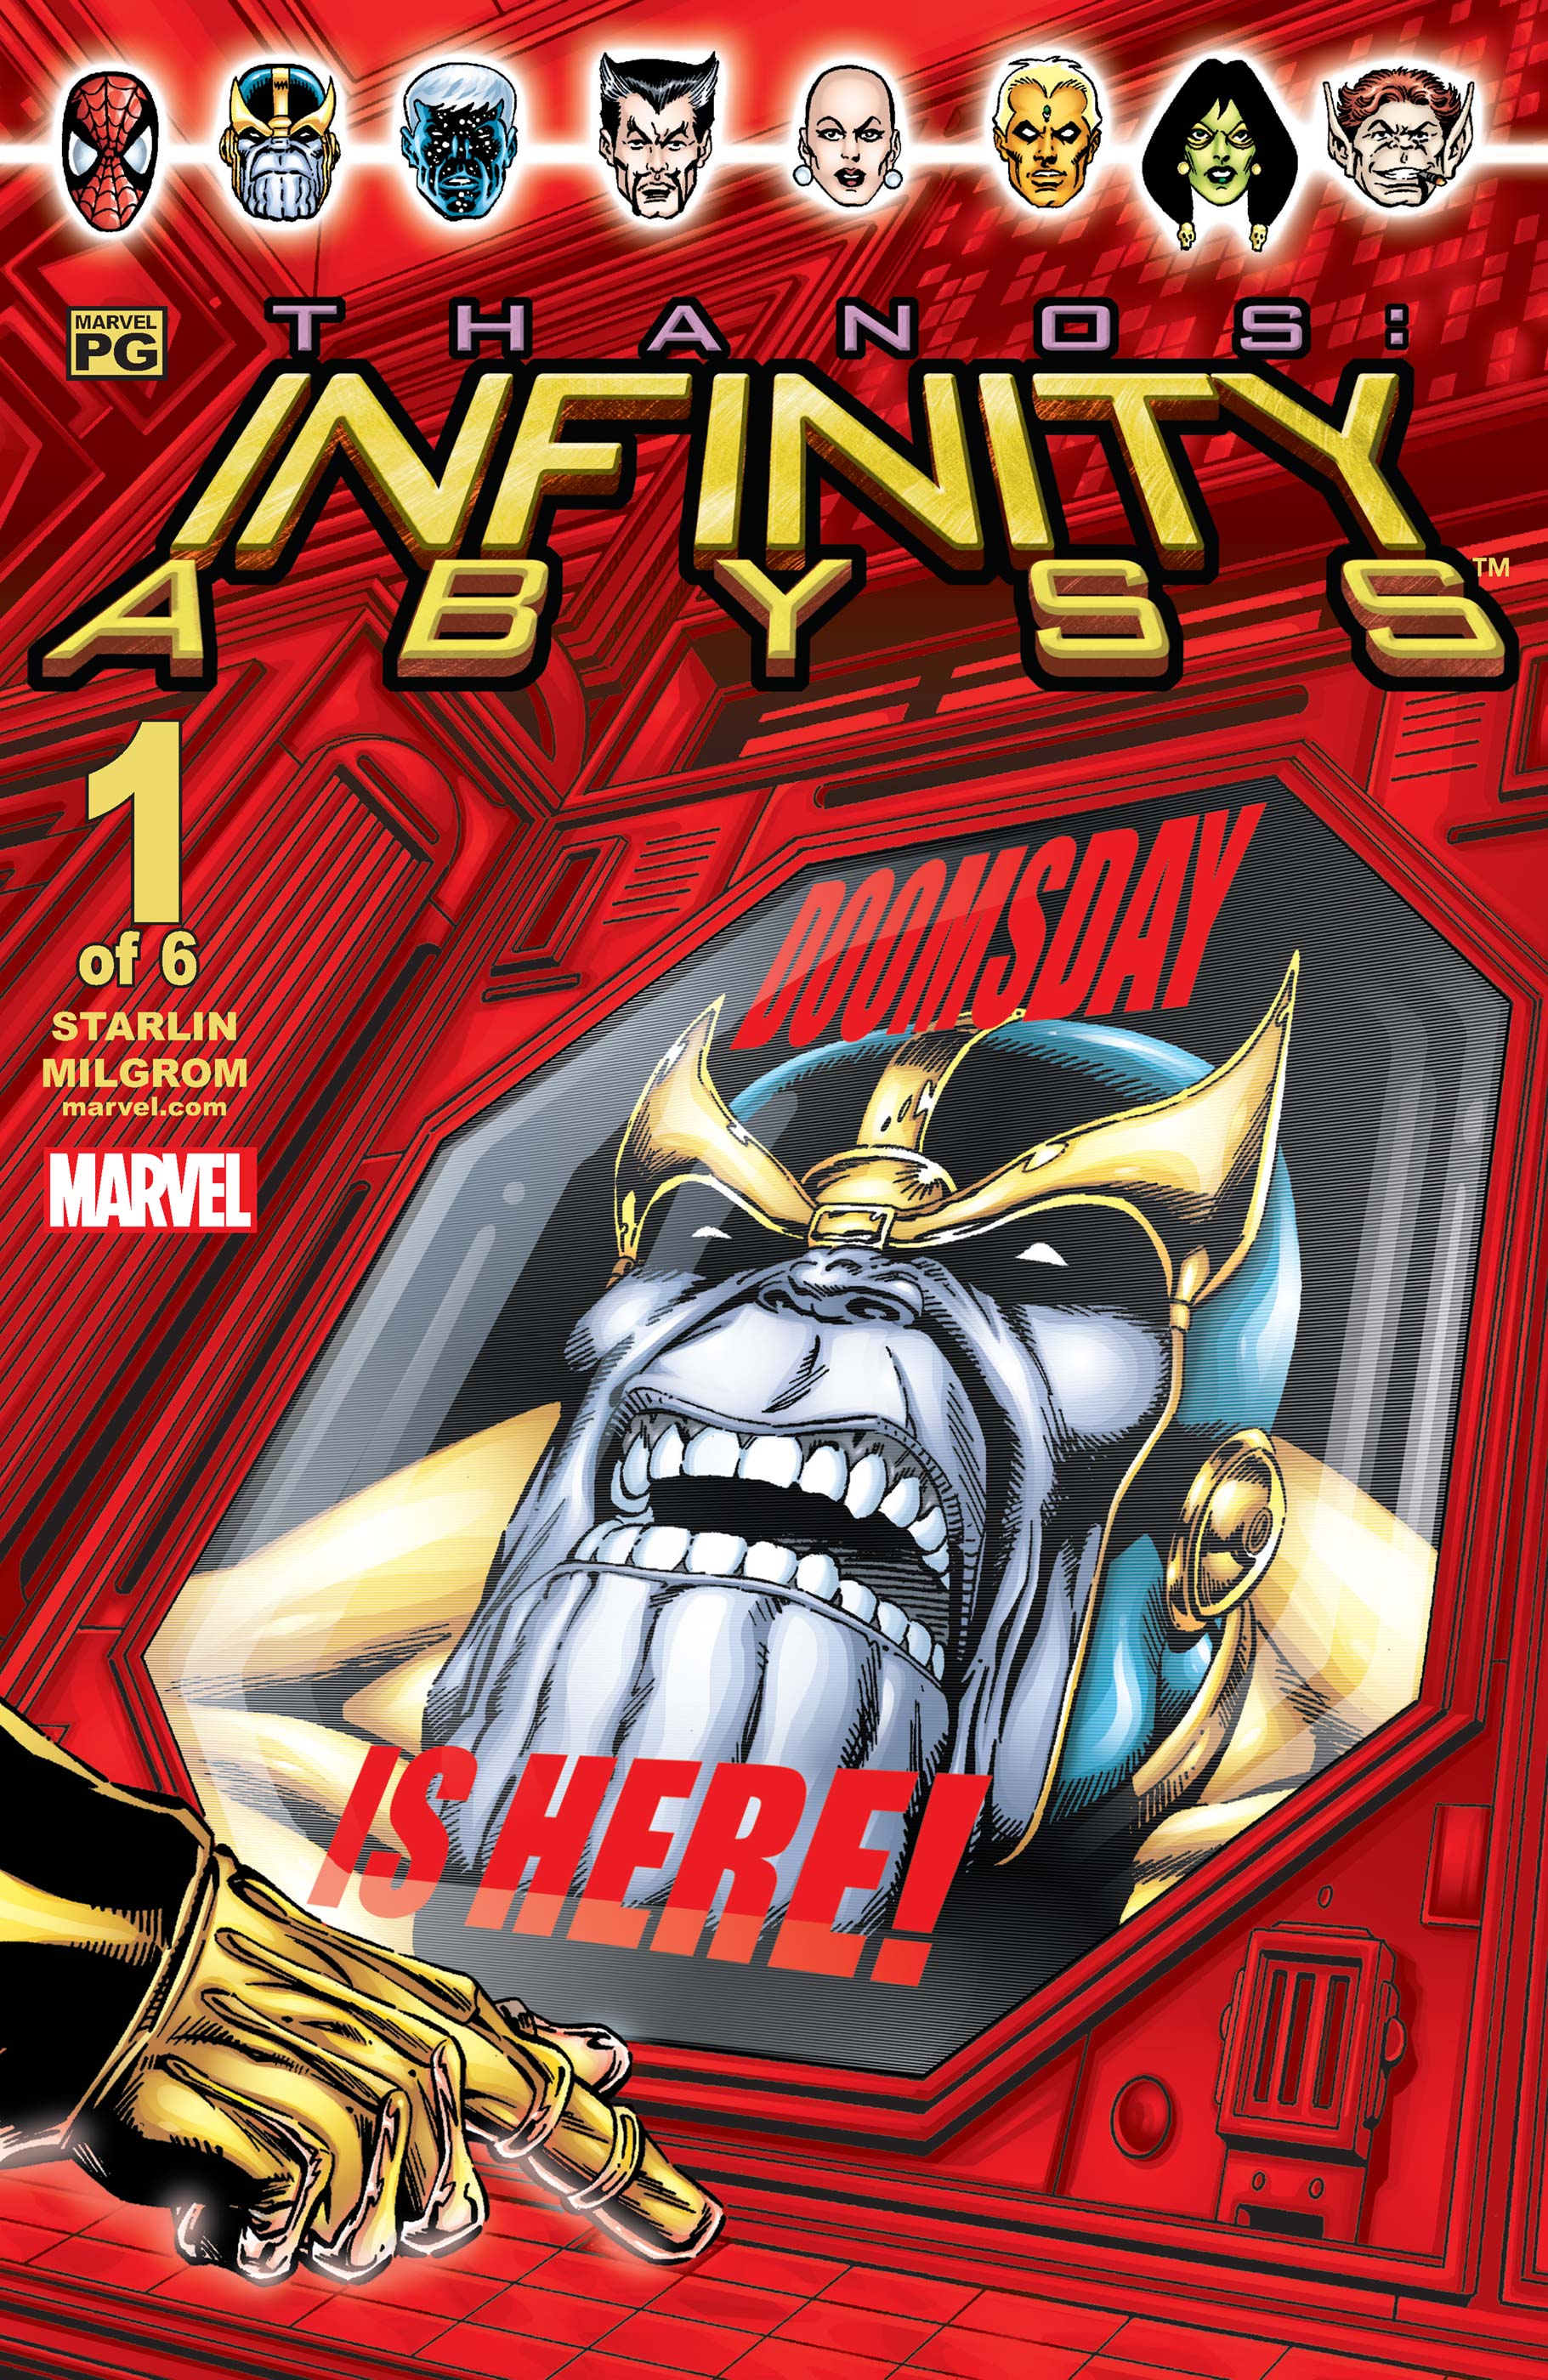 Marvel infinity abyss